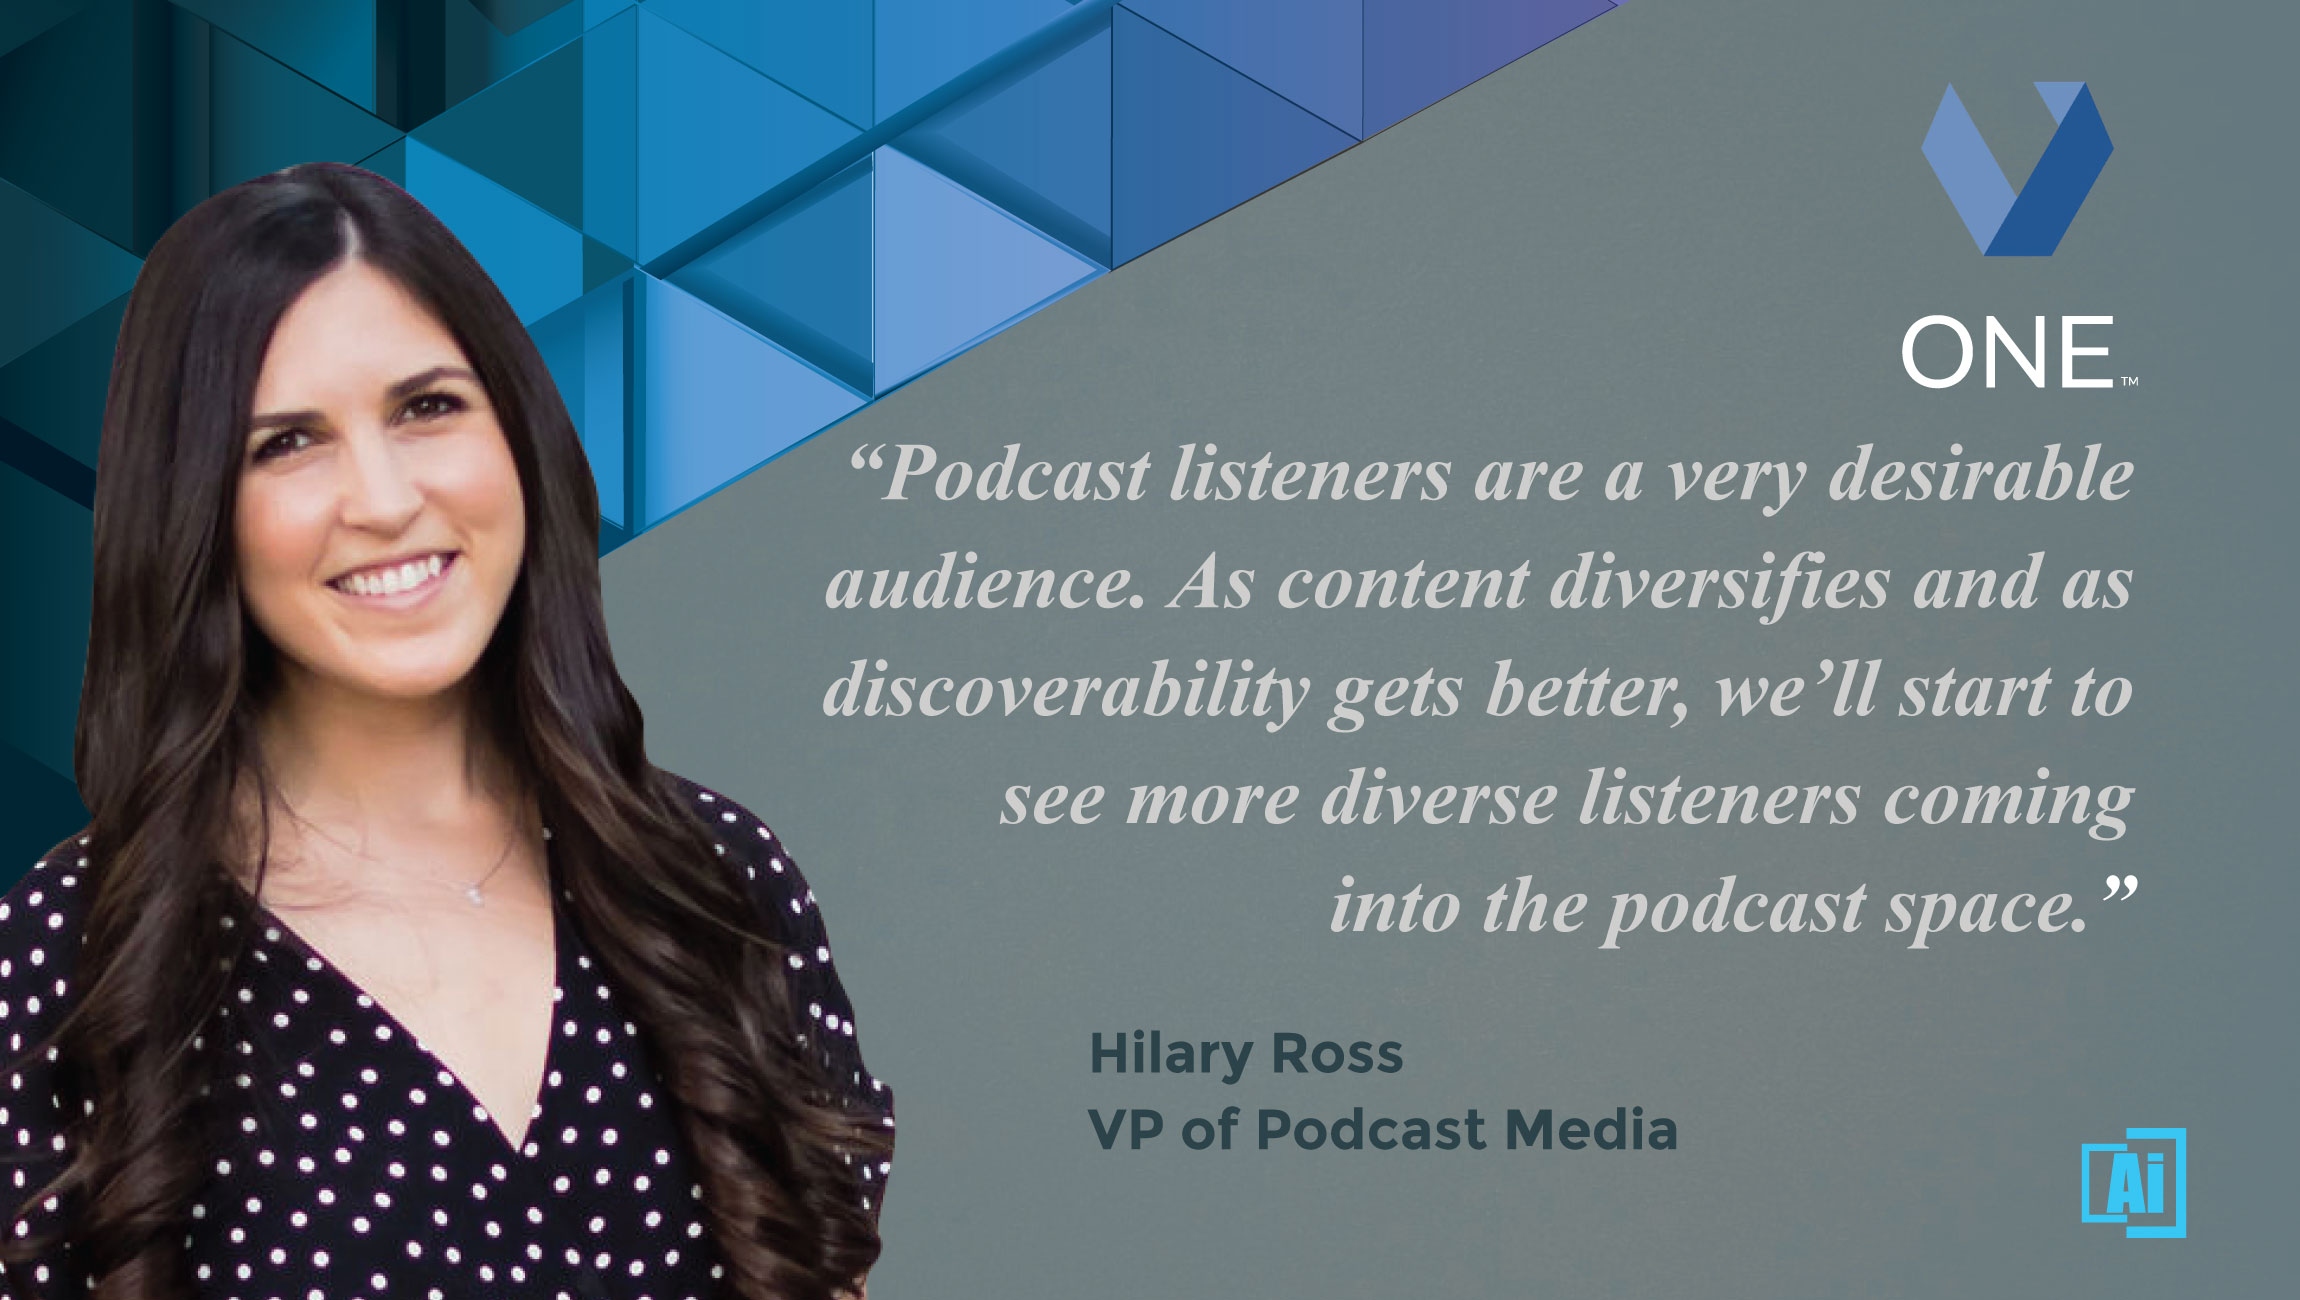 AiThority Interview with Hilary Ross, VP of Podcast Media at Veritone One